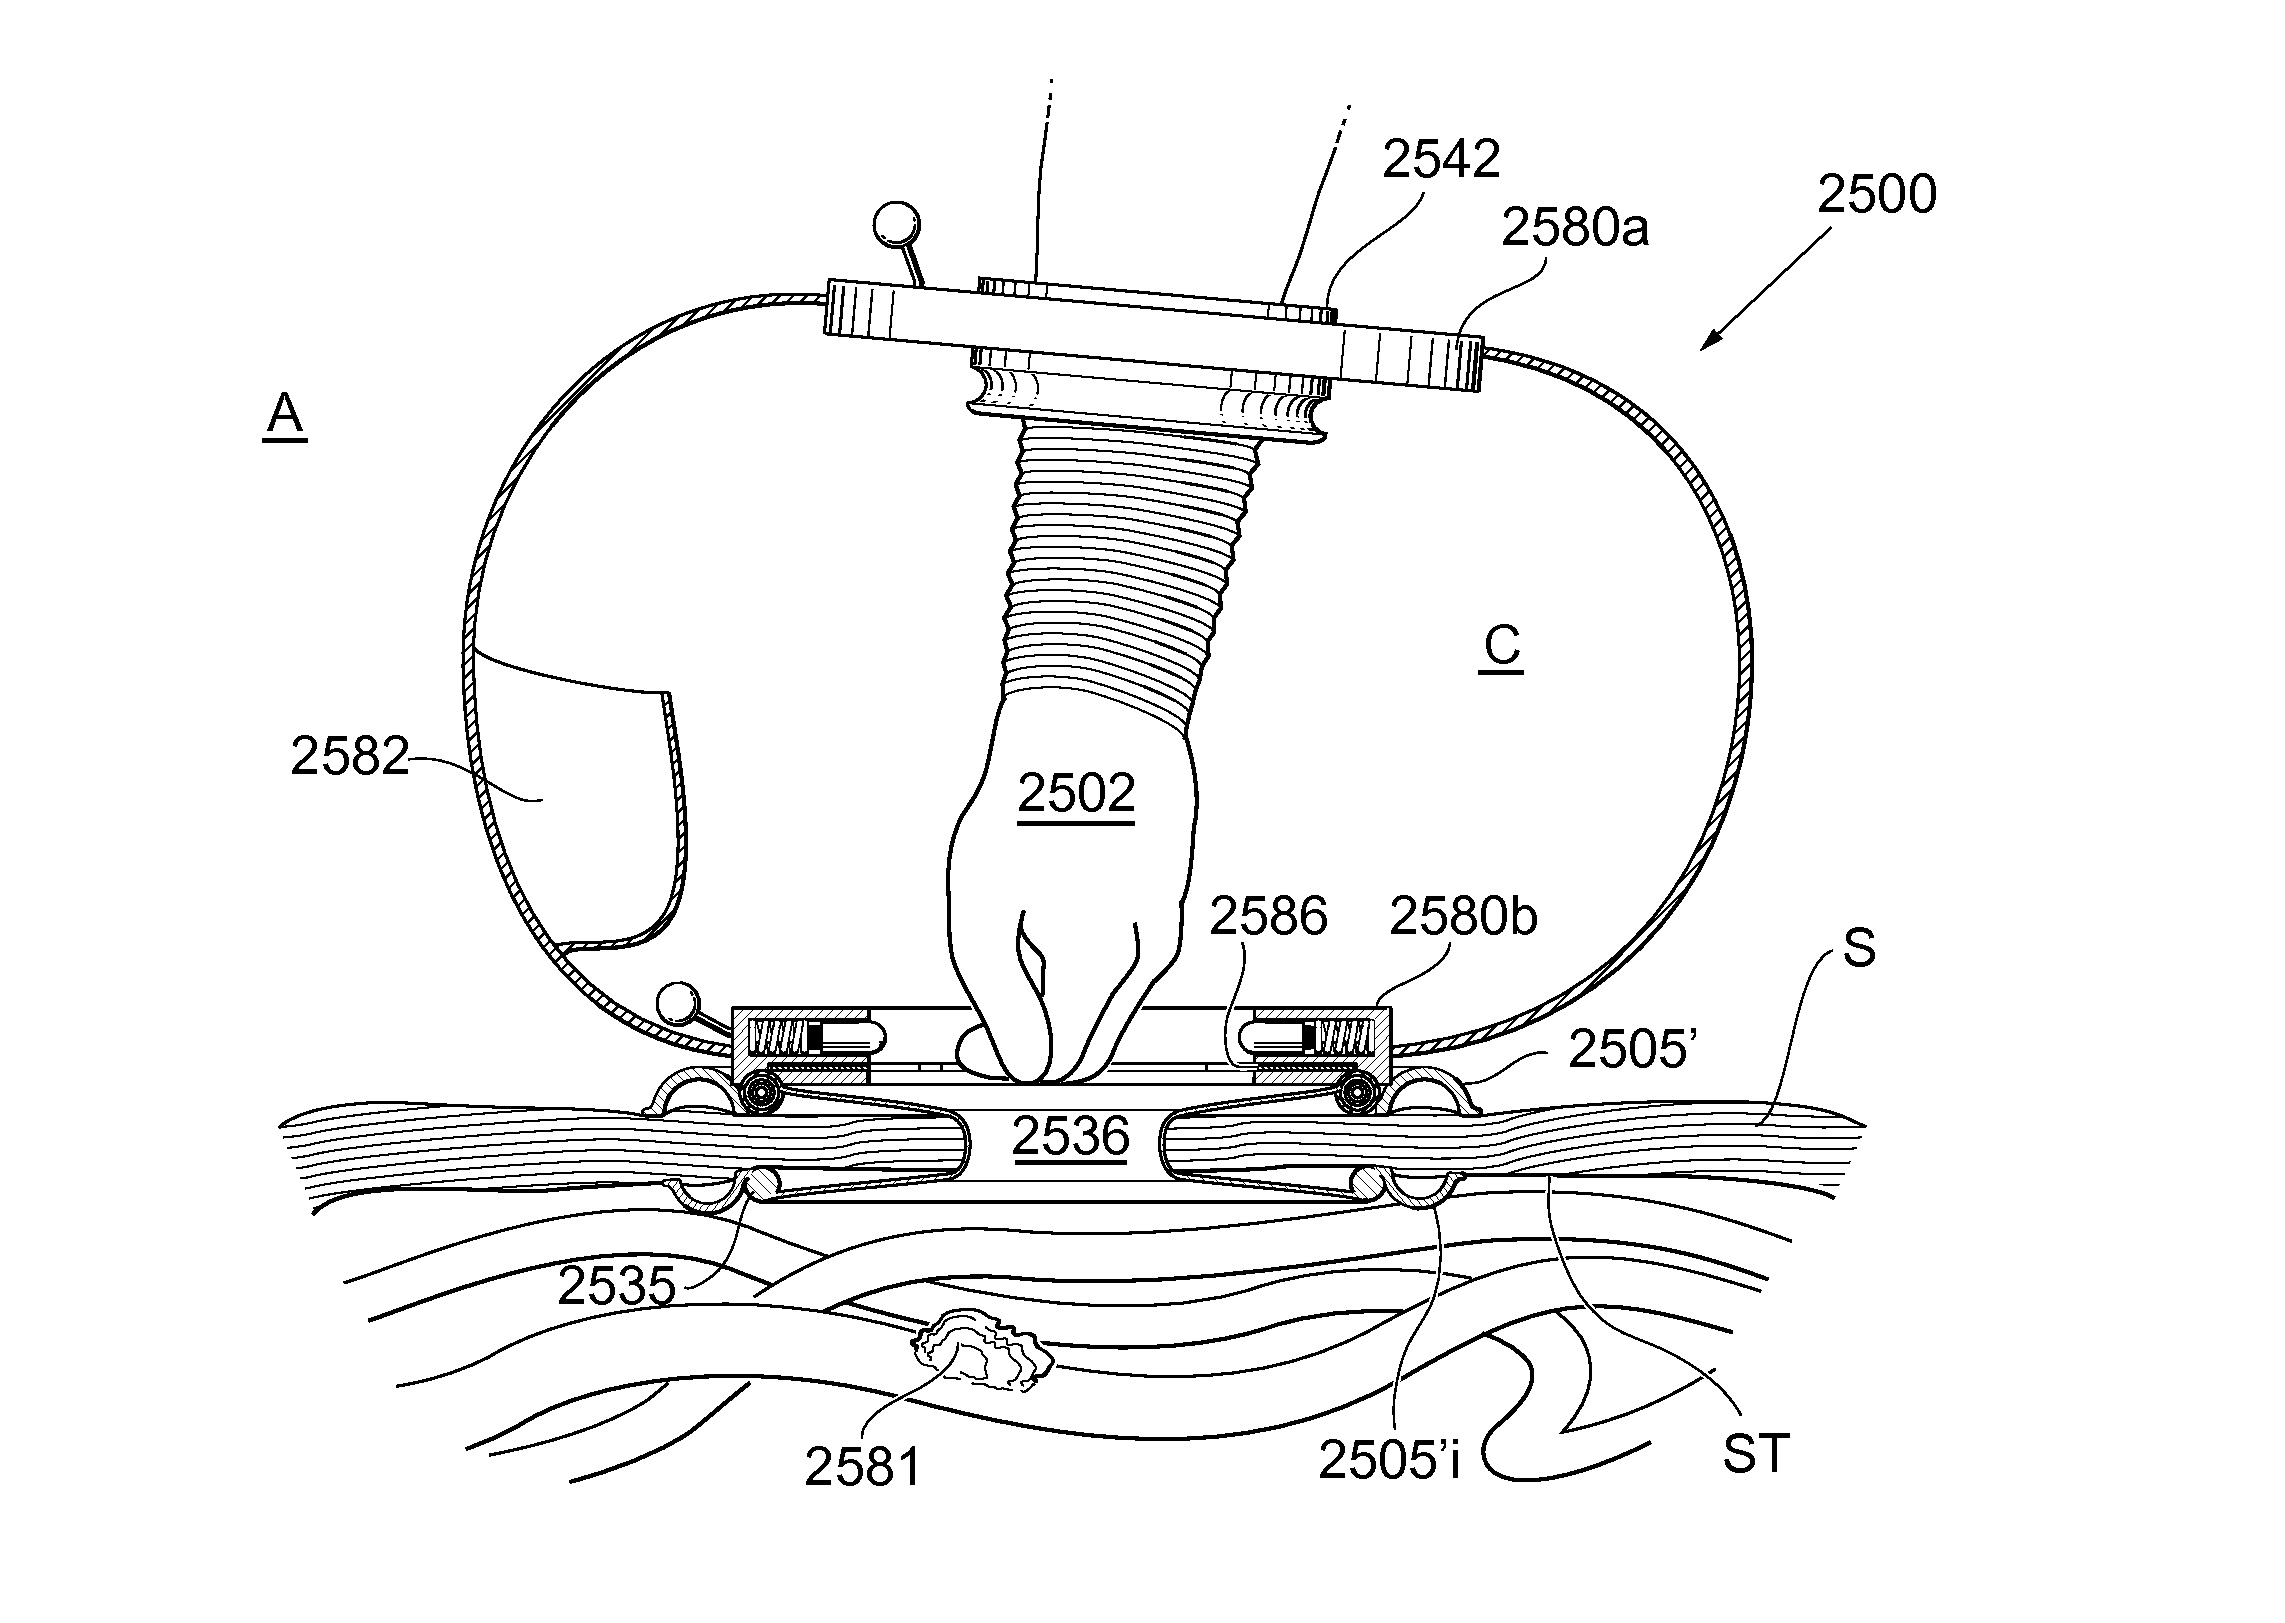 Surgical assisting device